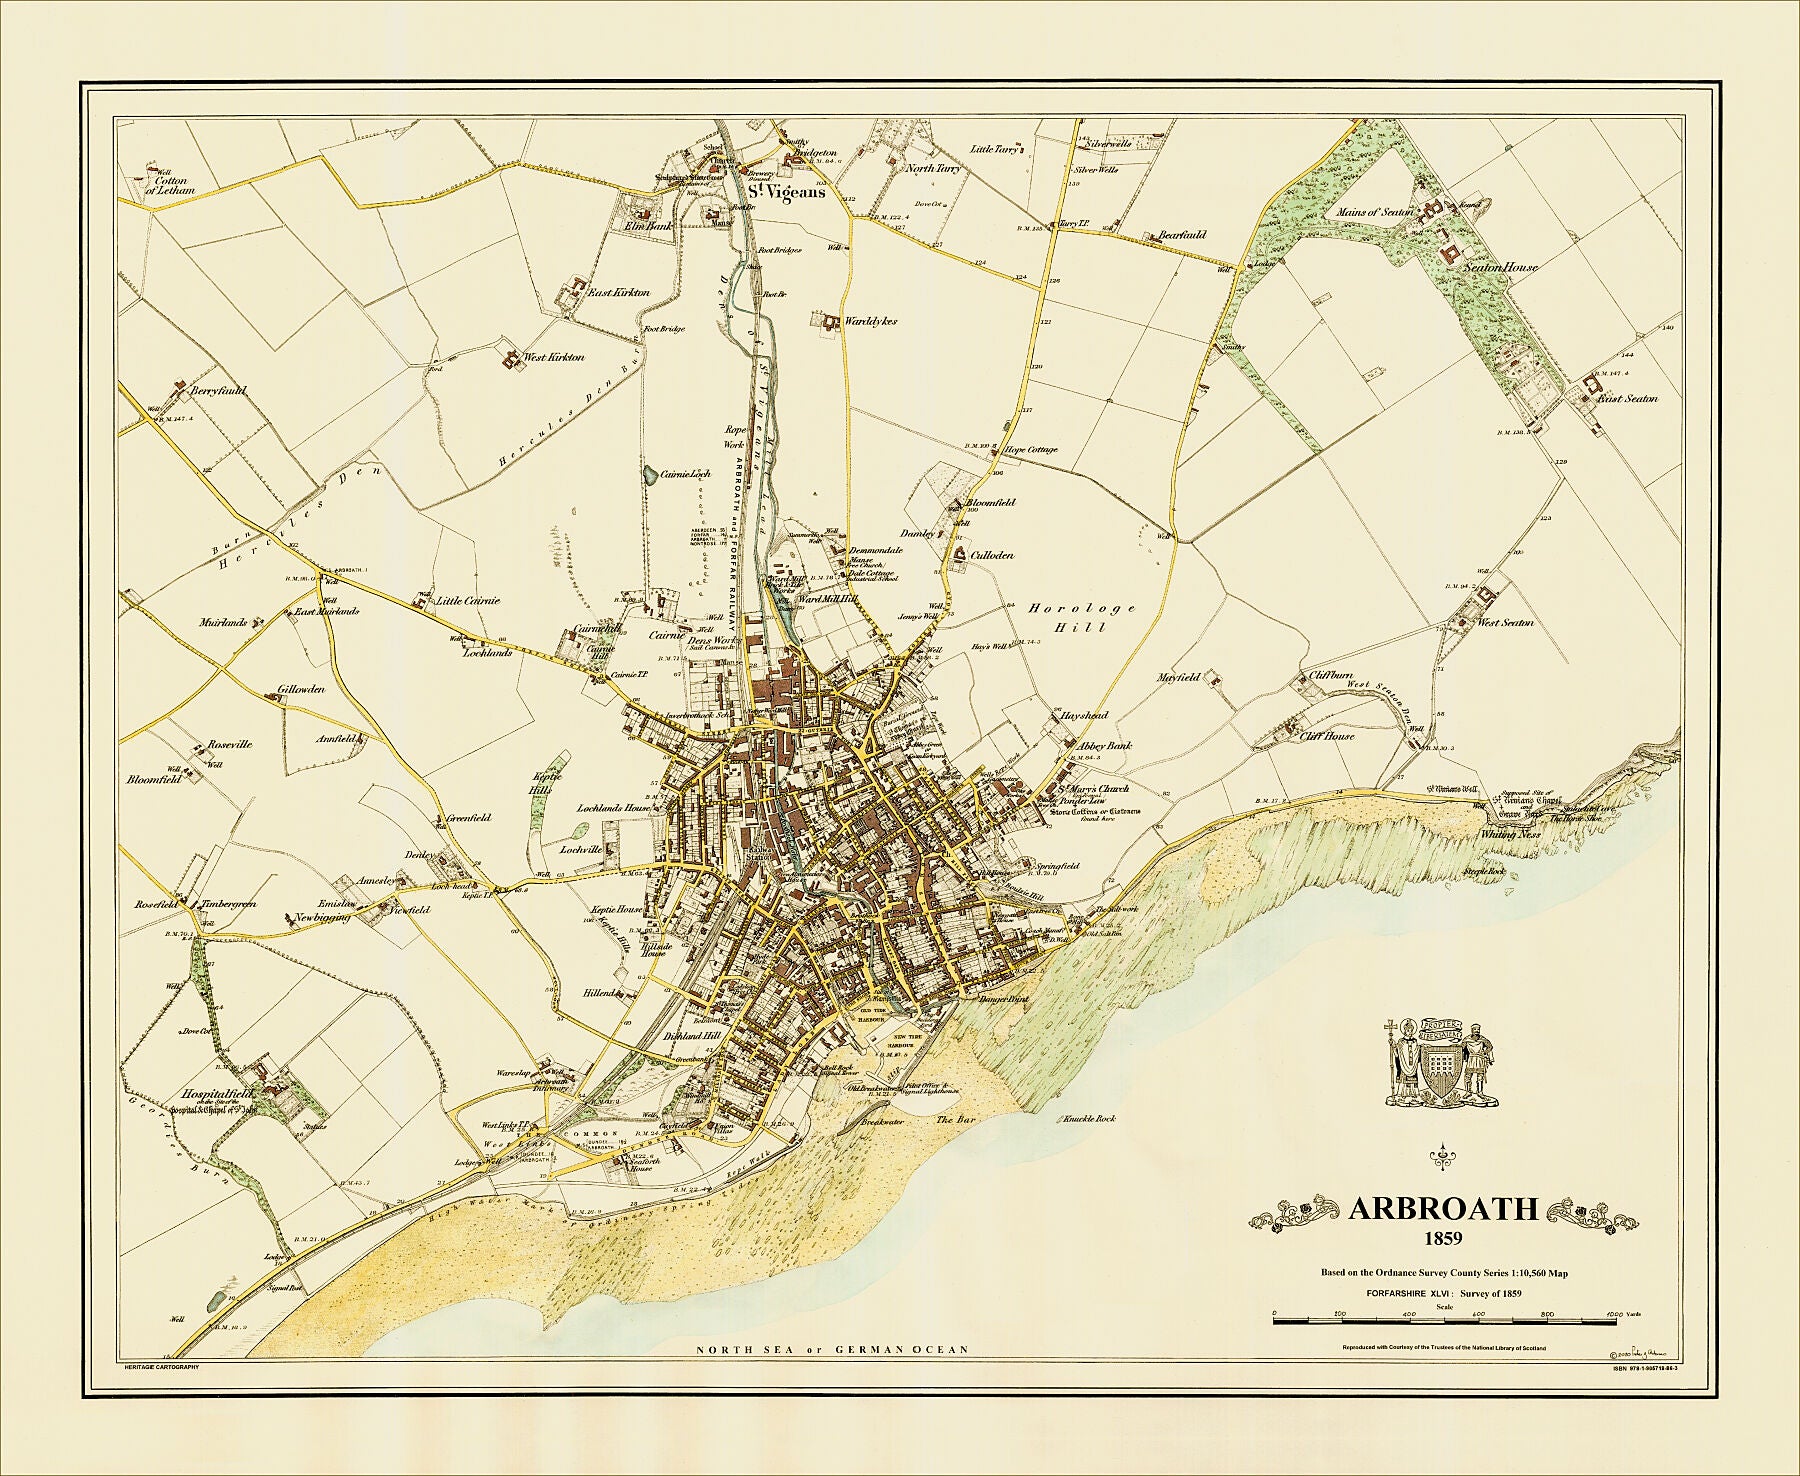 Coloured Victorian map of Arbroath in 1859 by Peter J Adams of Heritage Cartography